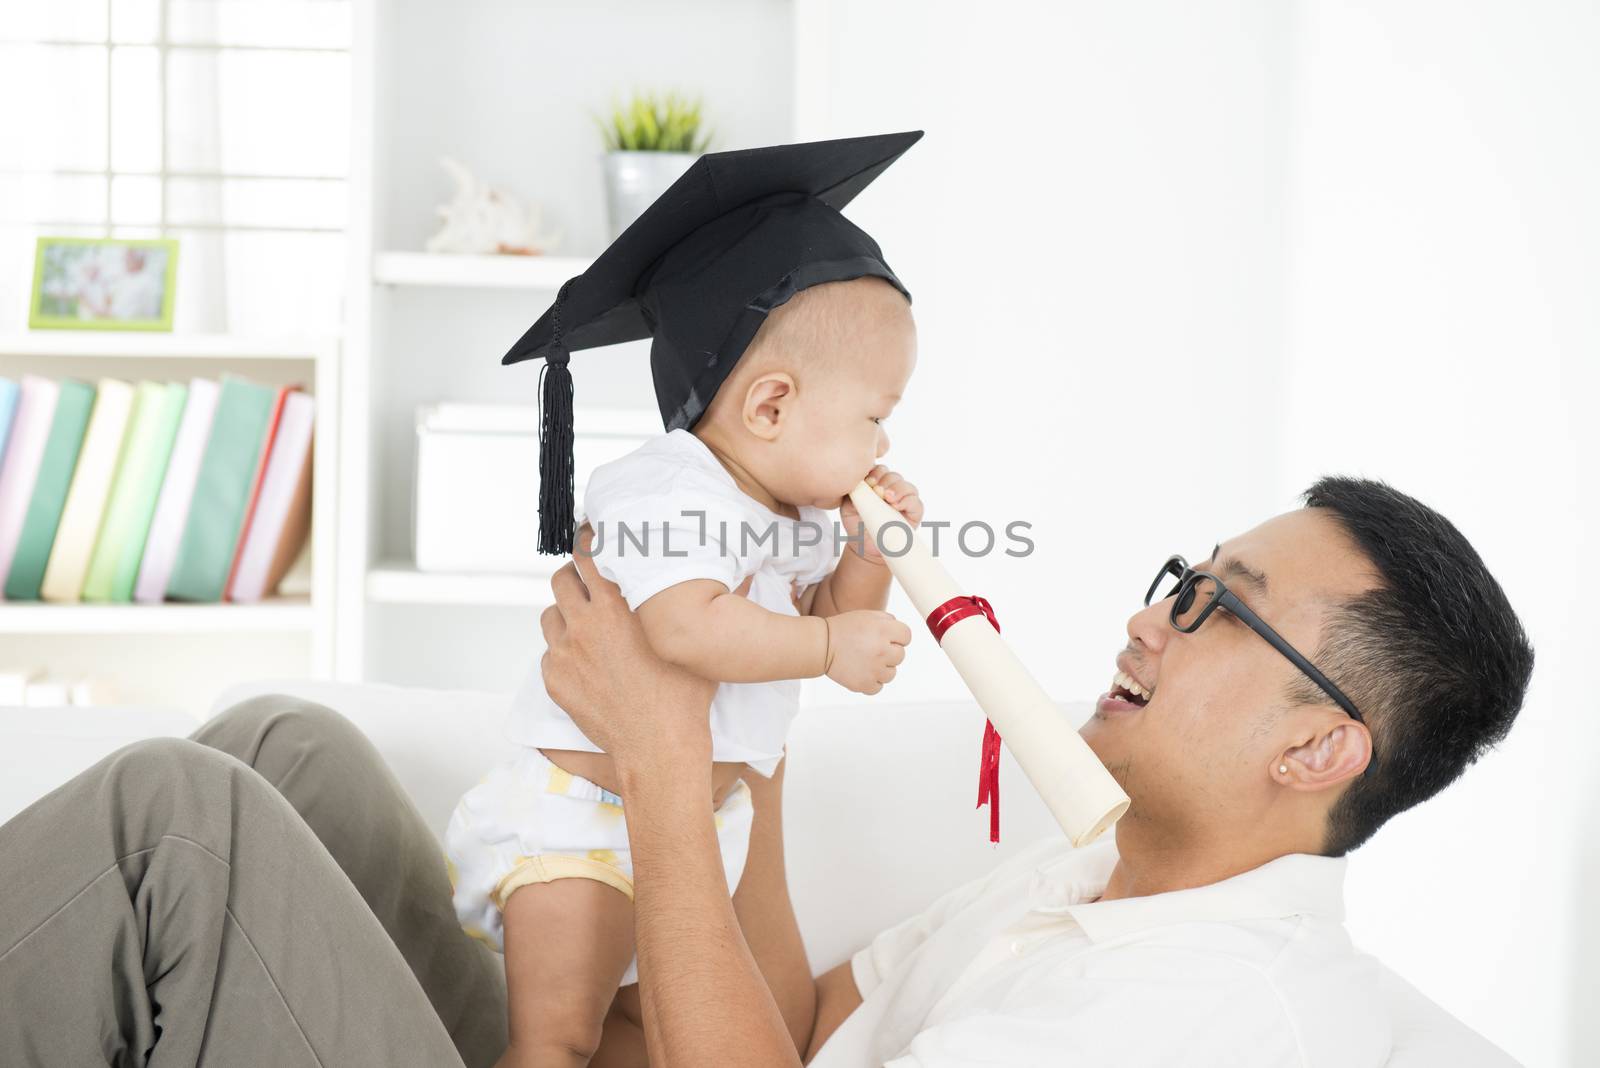 Baby with graduation cap holding certificate with father. Parent and child early education concept. Asian family lifestyle at home.